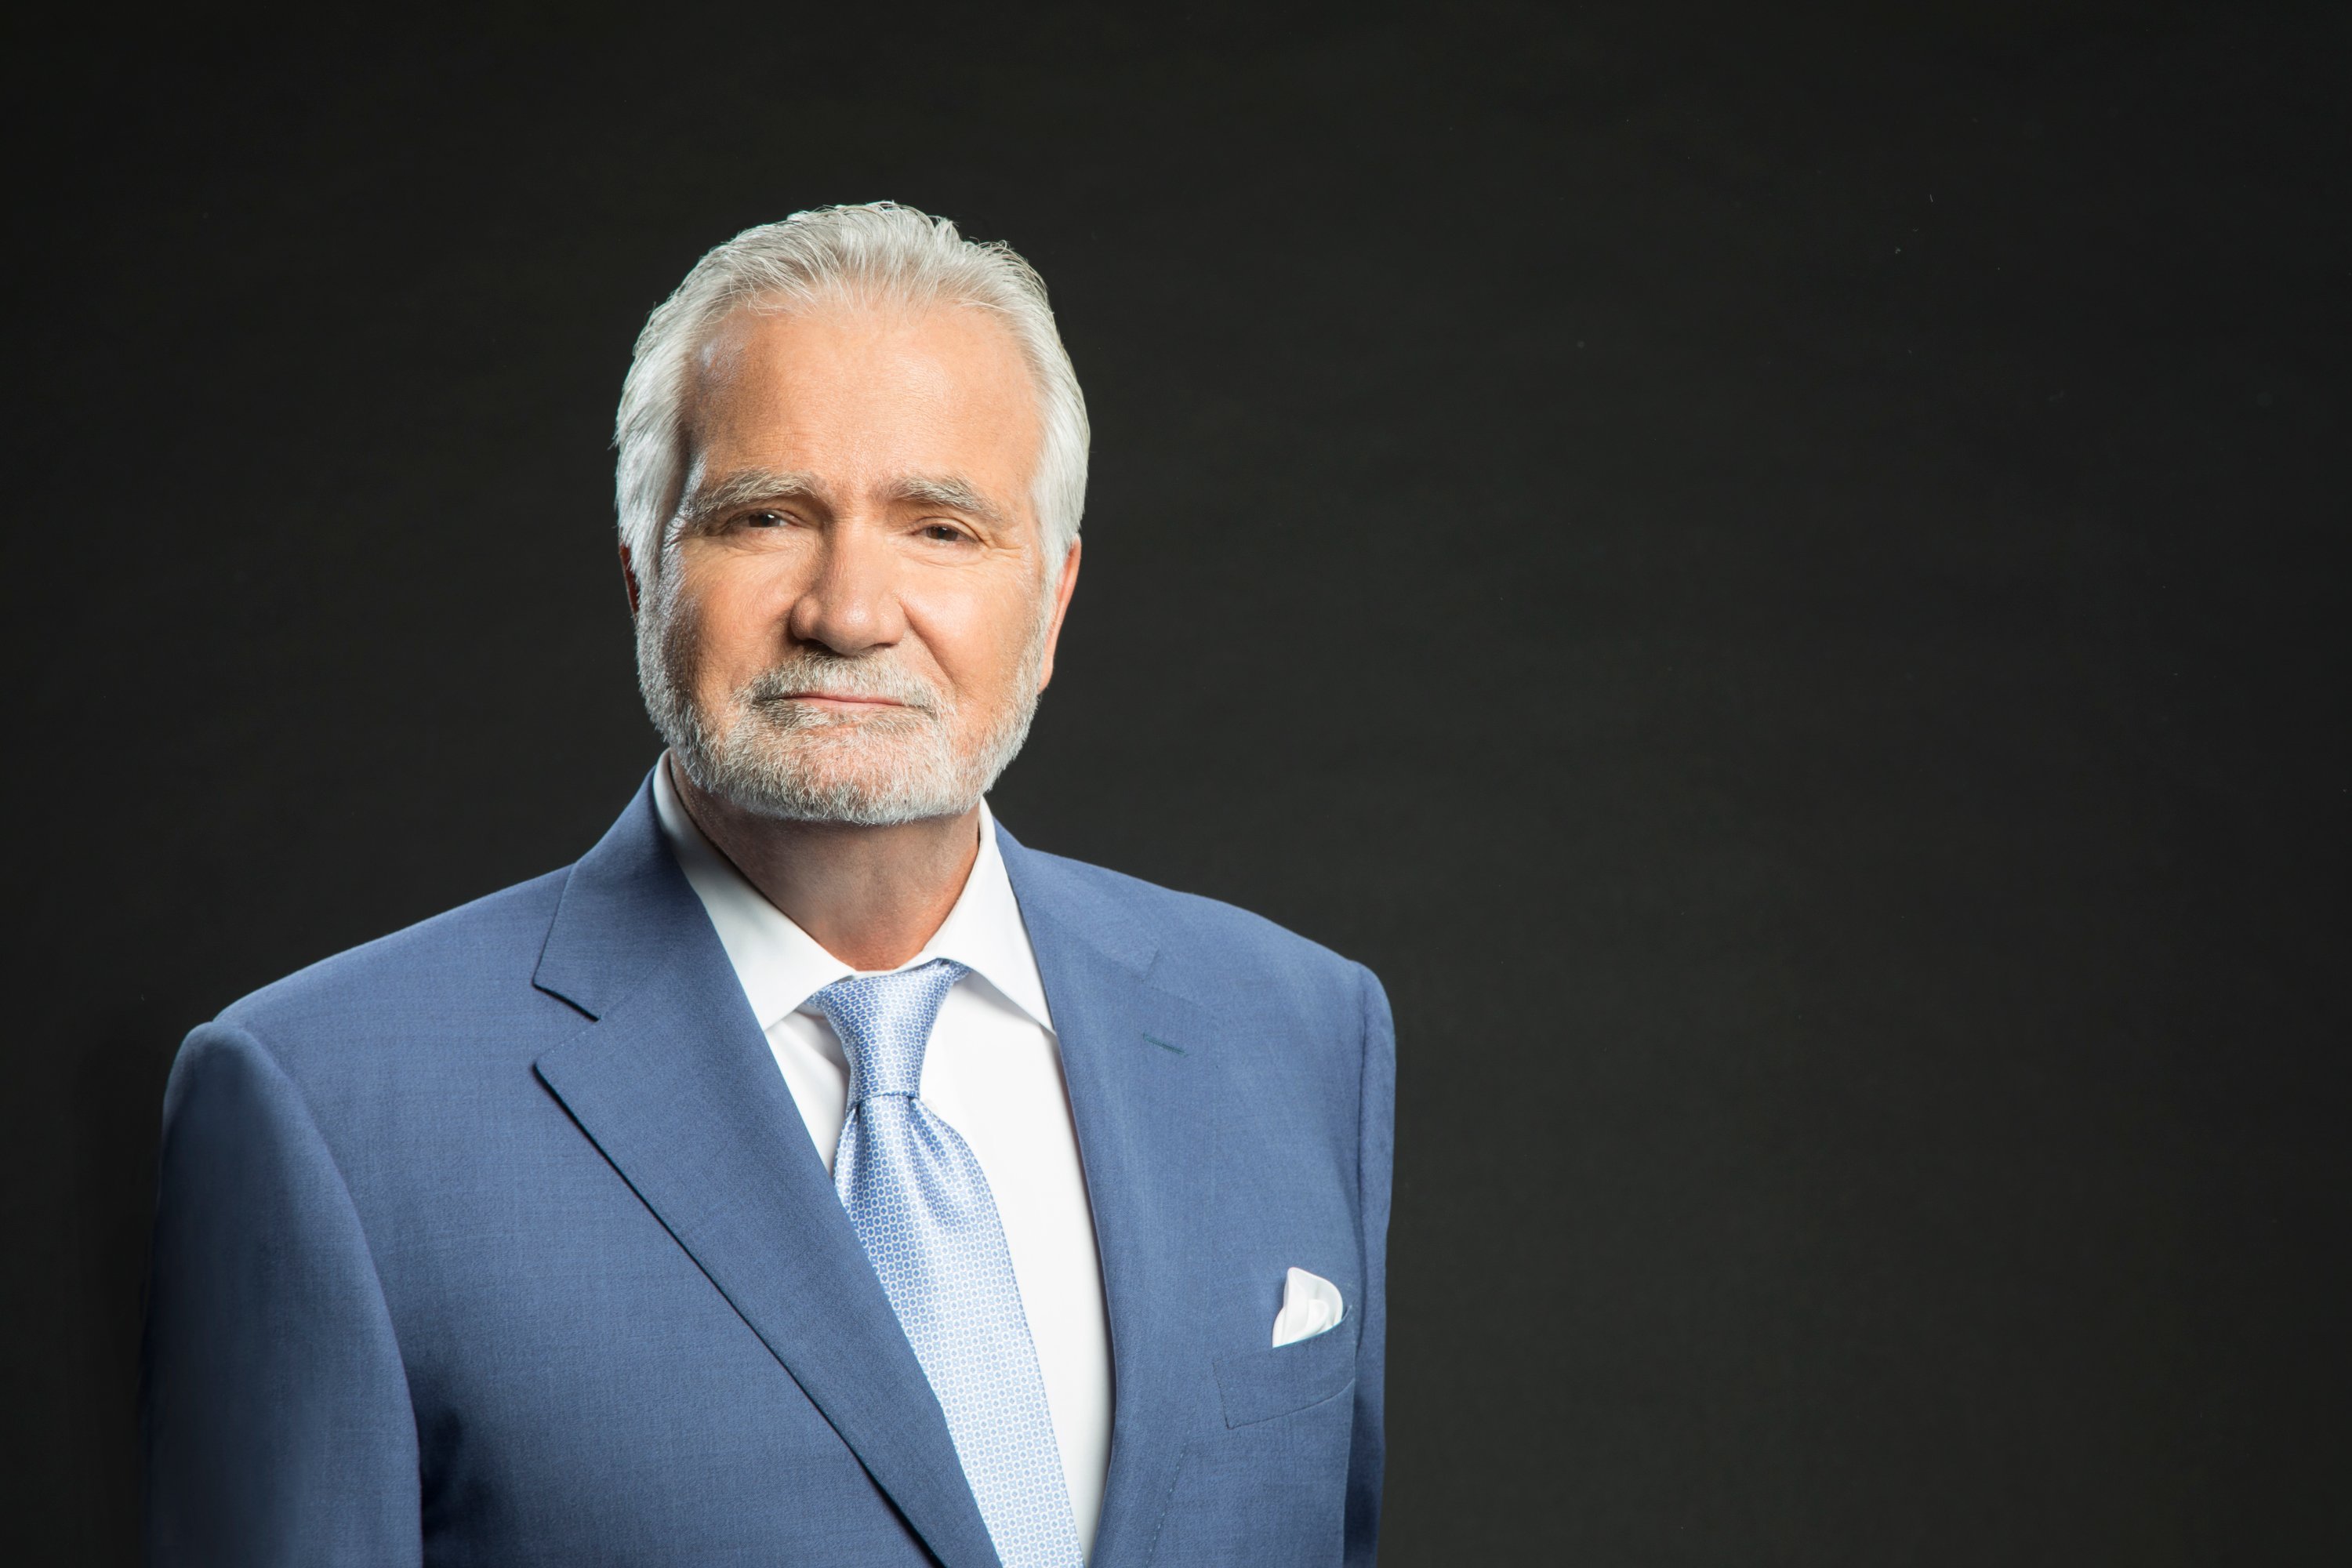 'The Bold and the Beautiful' actor John McCook wearing a white shirt and blue suit, stands in front of a black backdrop.